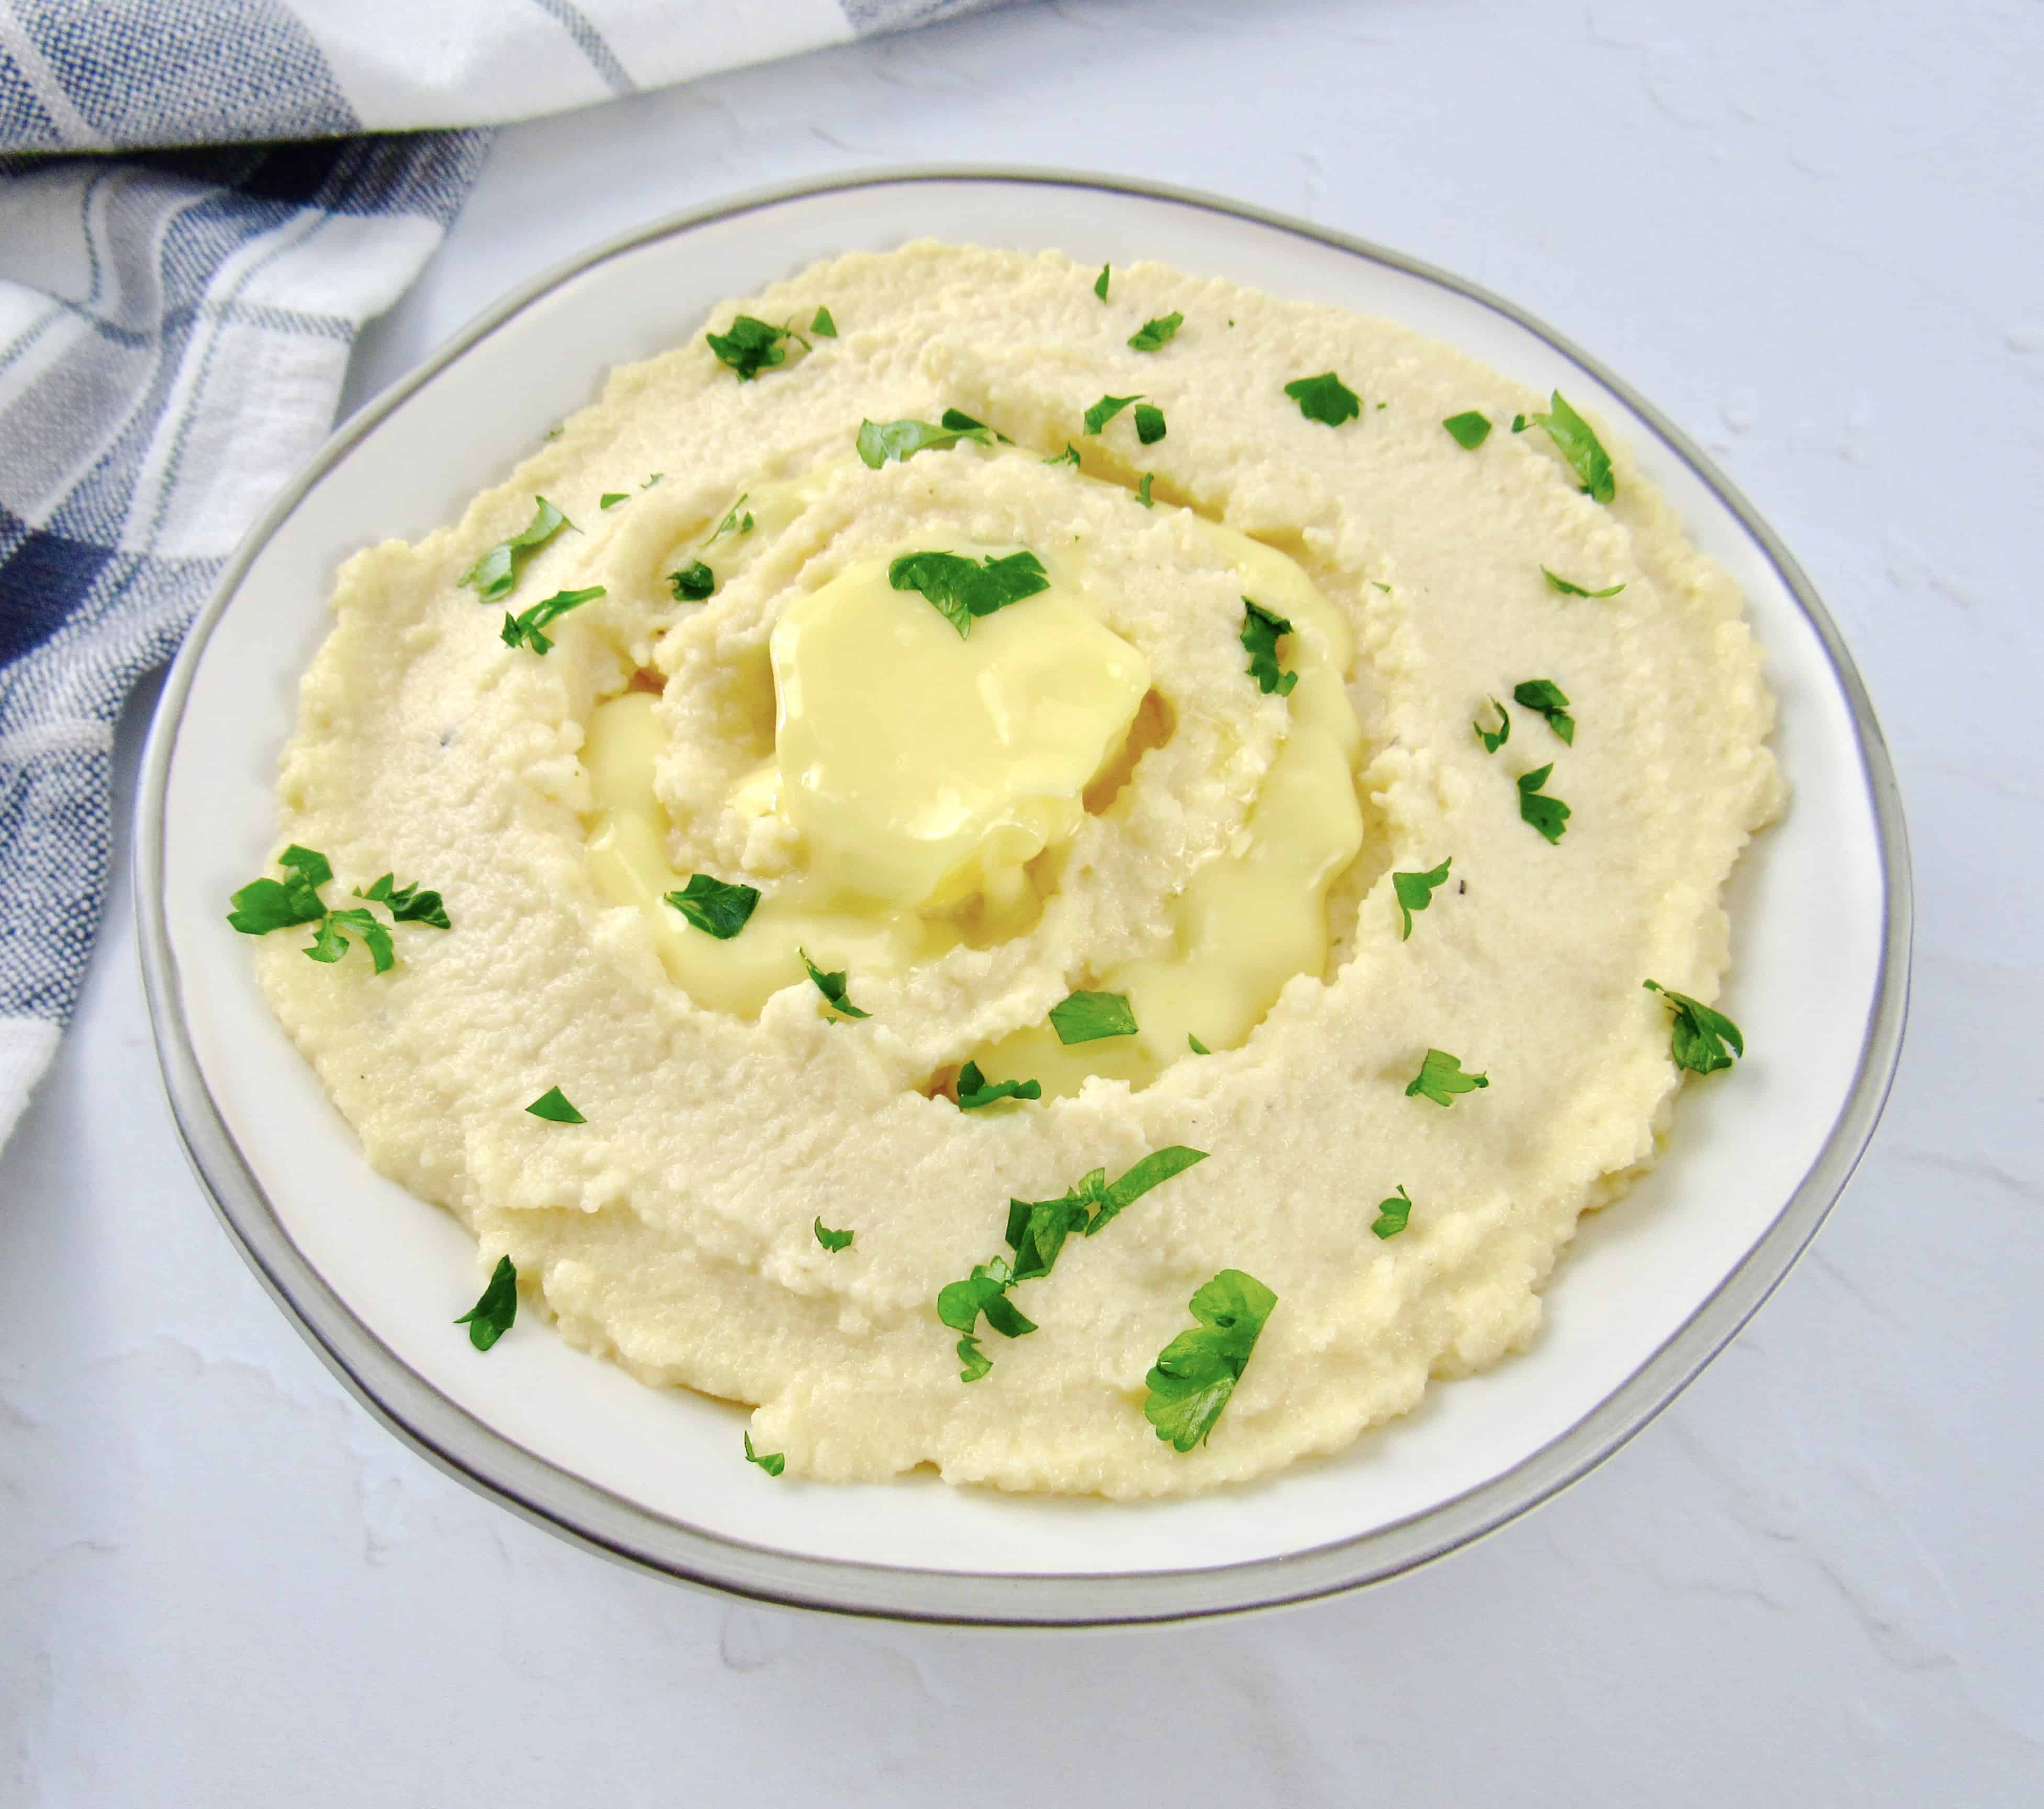 bowl of mashed cauliflower with parsley and butter on top